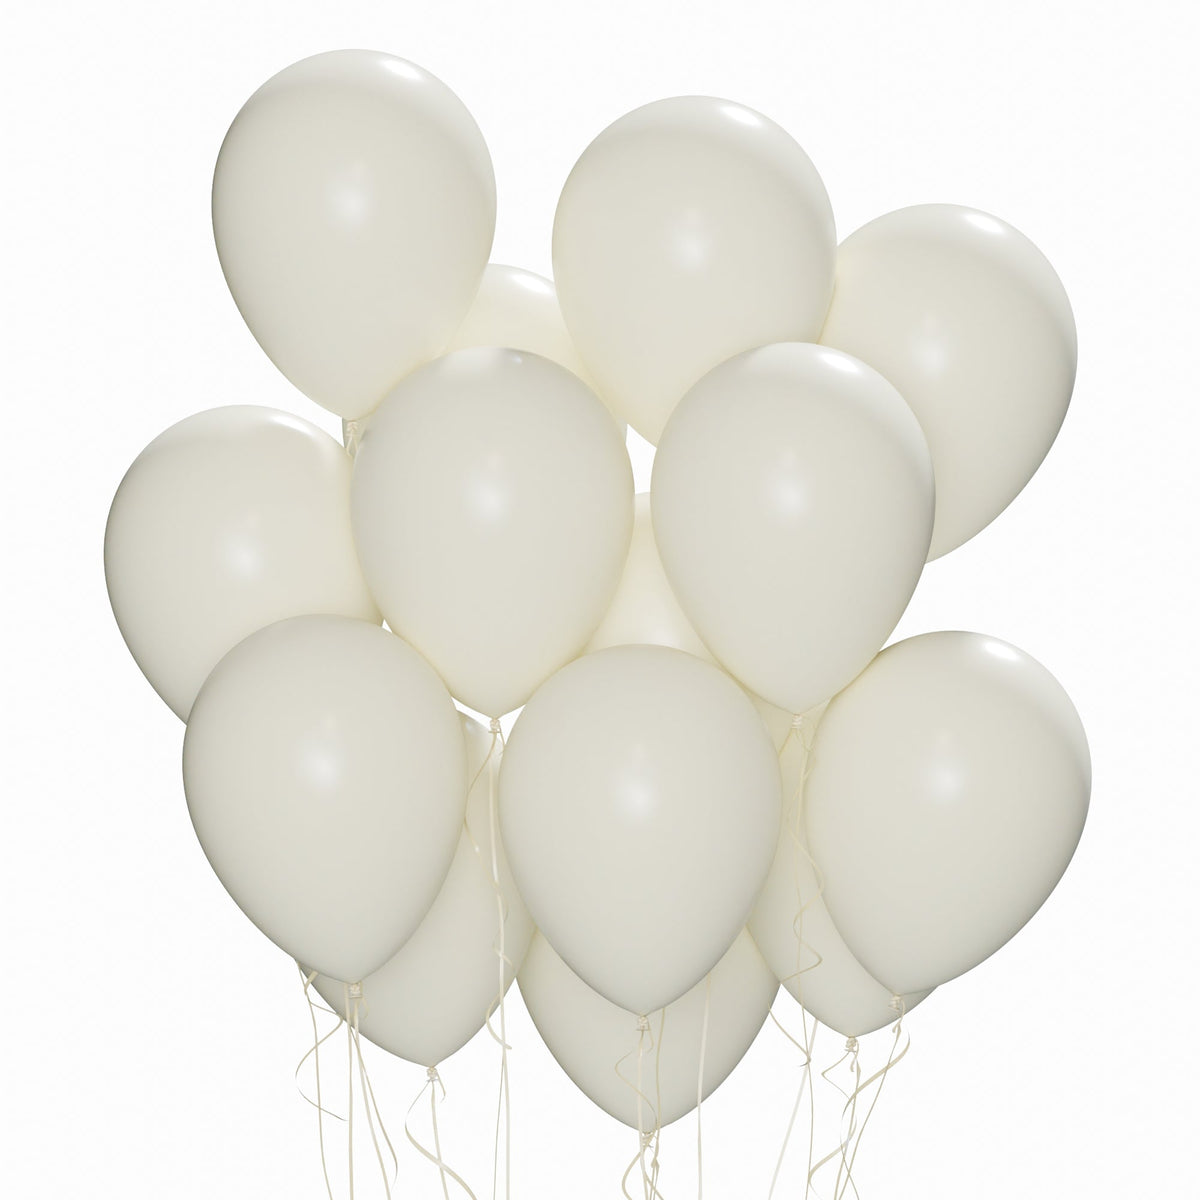 WIDE OCEAN INTERNATIONAL TRADE BEIJING CO., LTD Balloons Ivory Latex Balloons, 12 Inches, 15 Count 810077656389